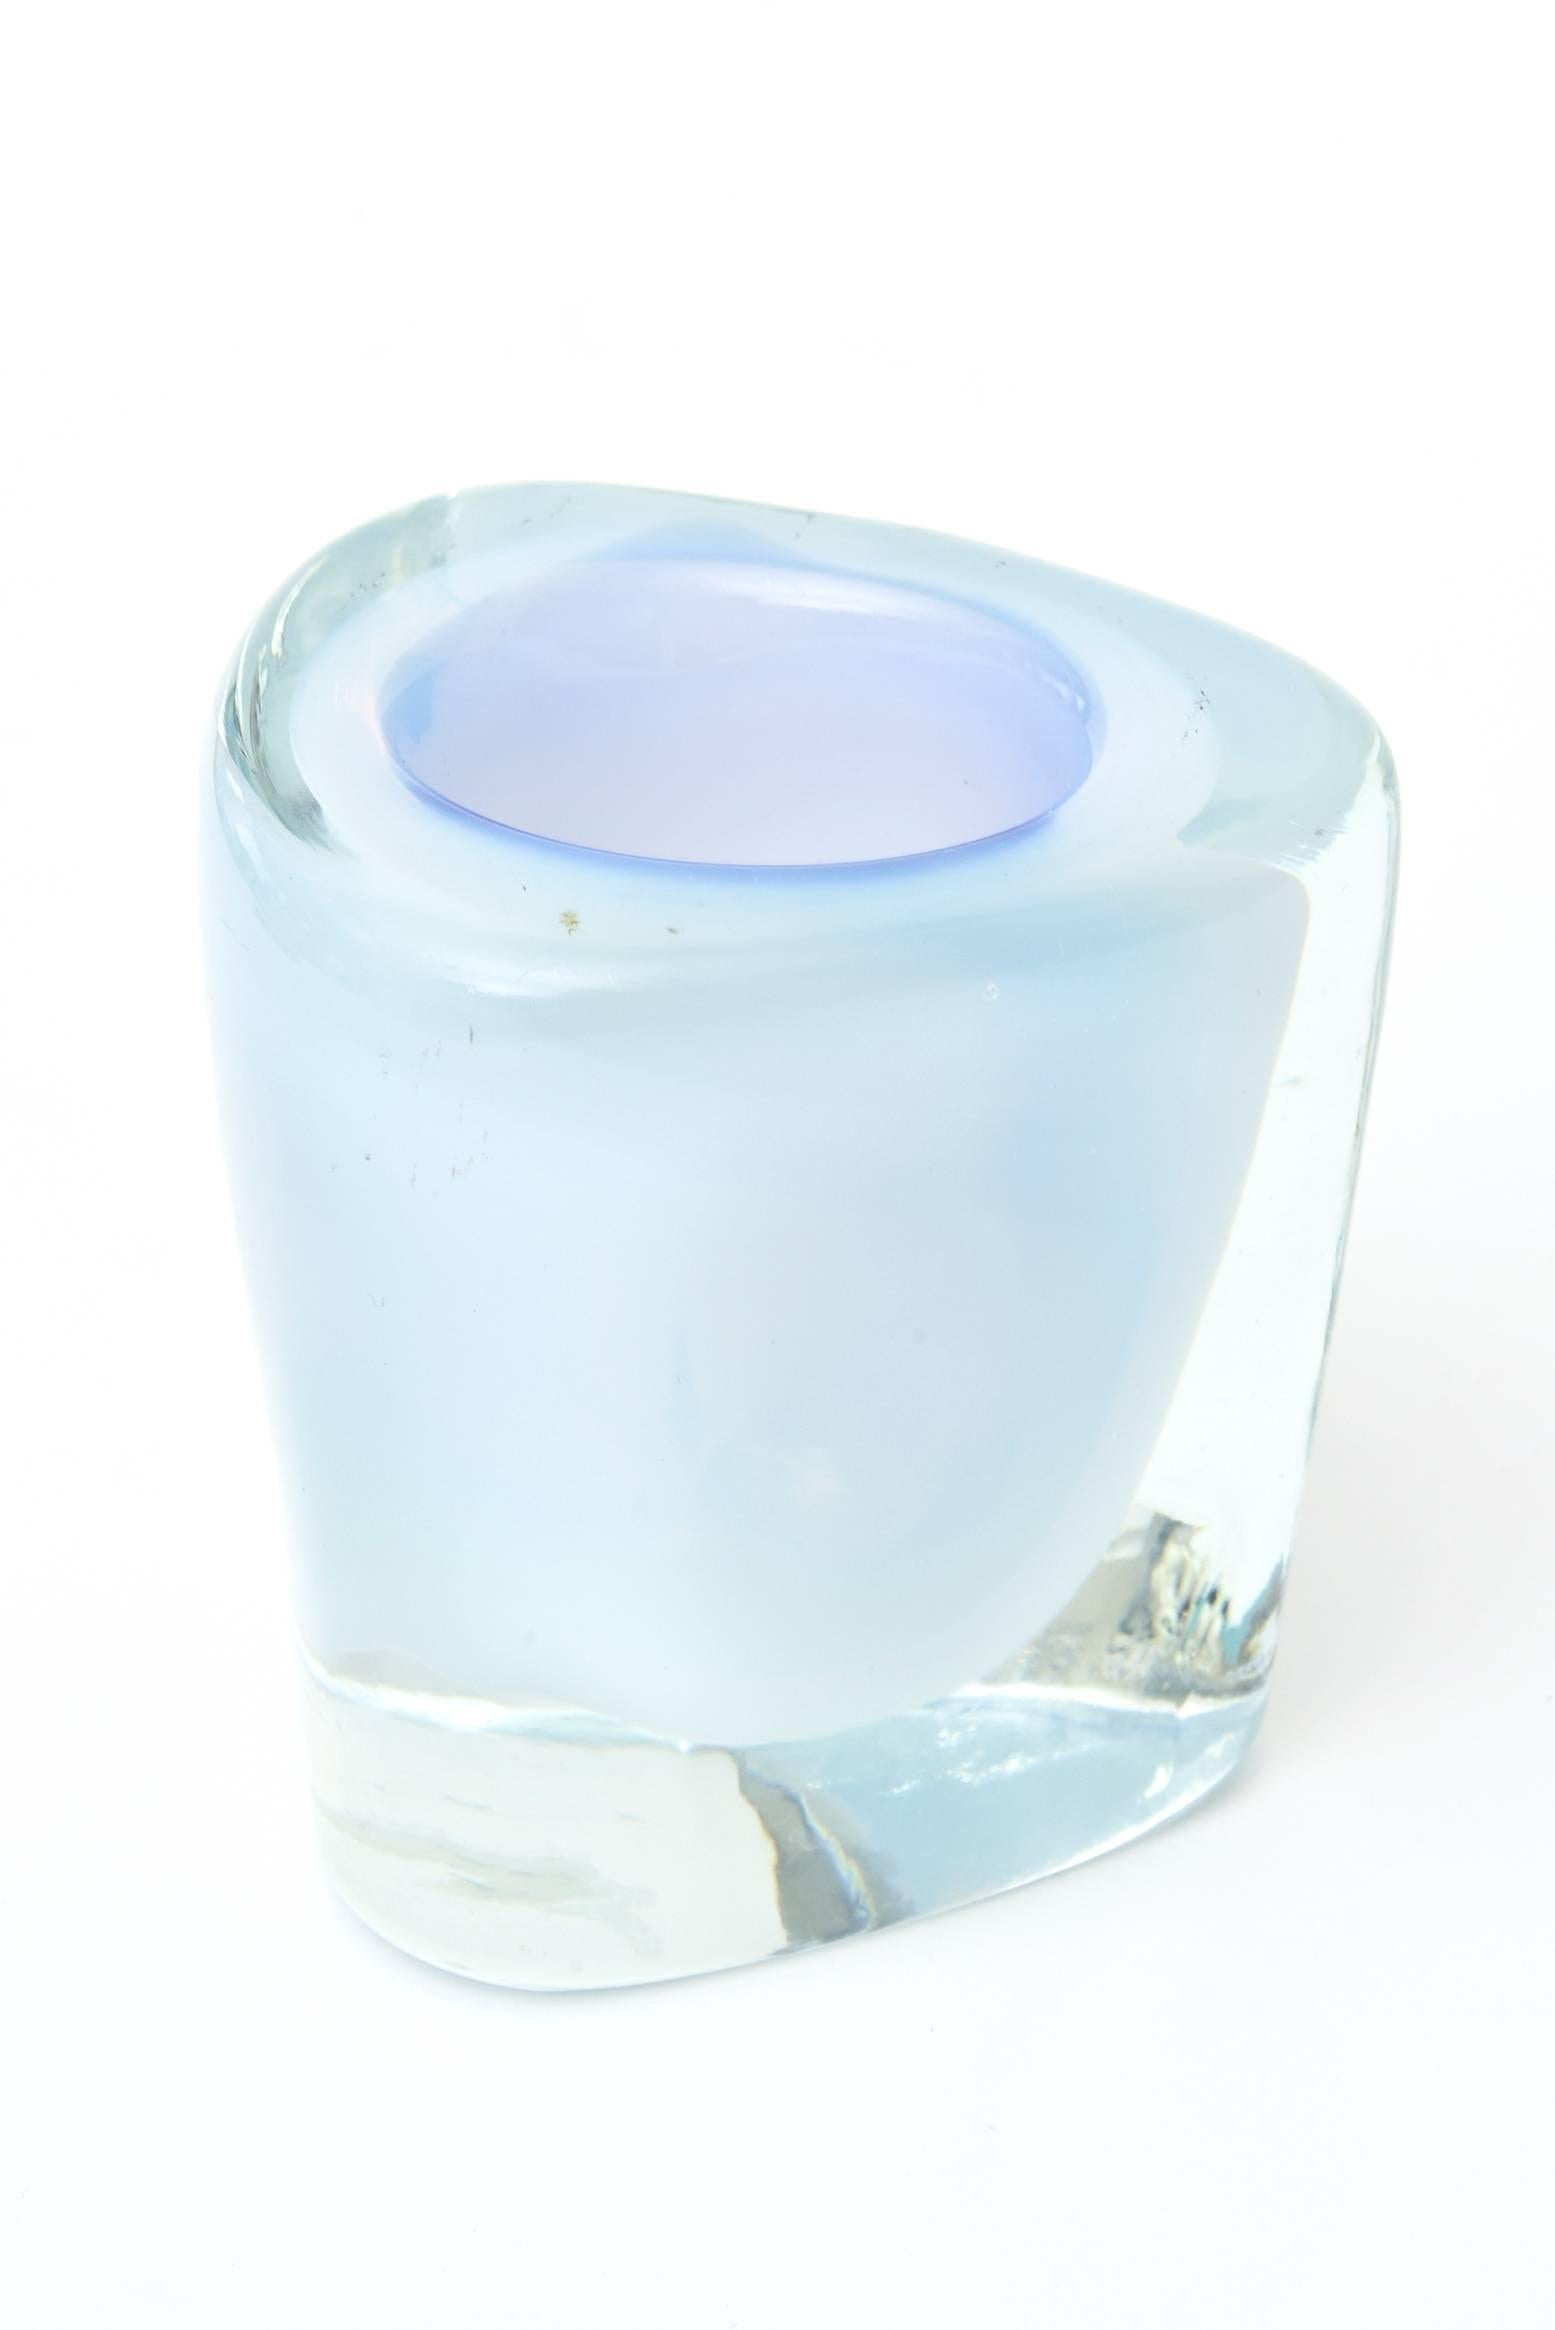 This beautiful and ethereal looking vintage Murano glass vessel is layered with opalescent Sommerso glass and bordered on top with a blue rim.
It can be used for so many purposes one ladies makeup brushes or gardenias or roses or etc. It is a